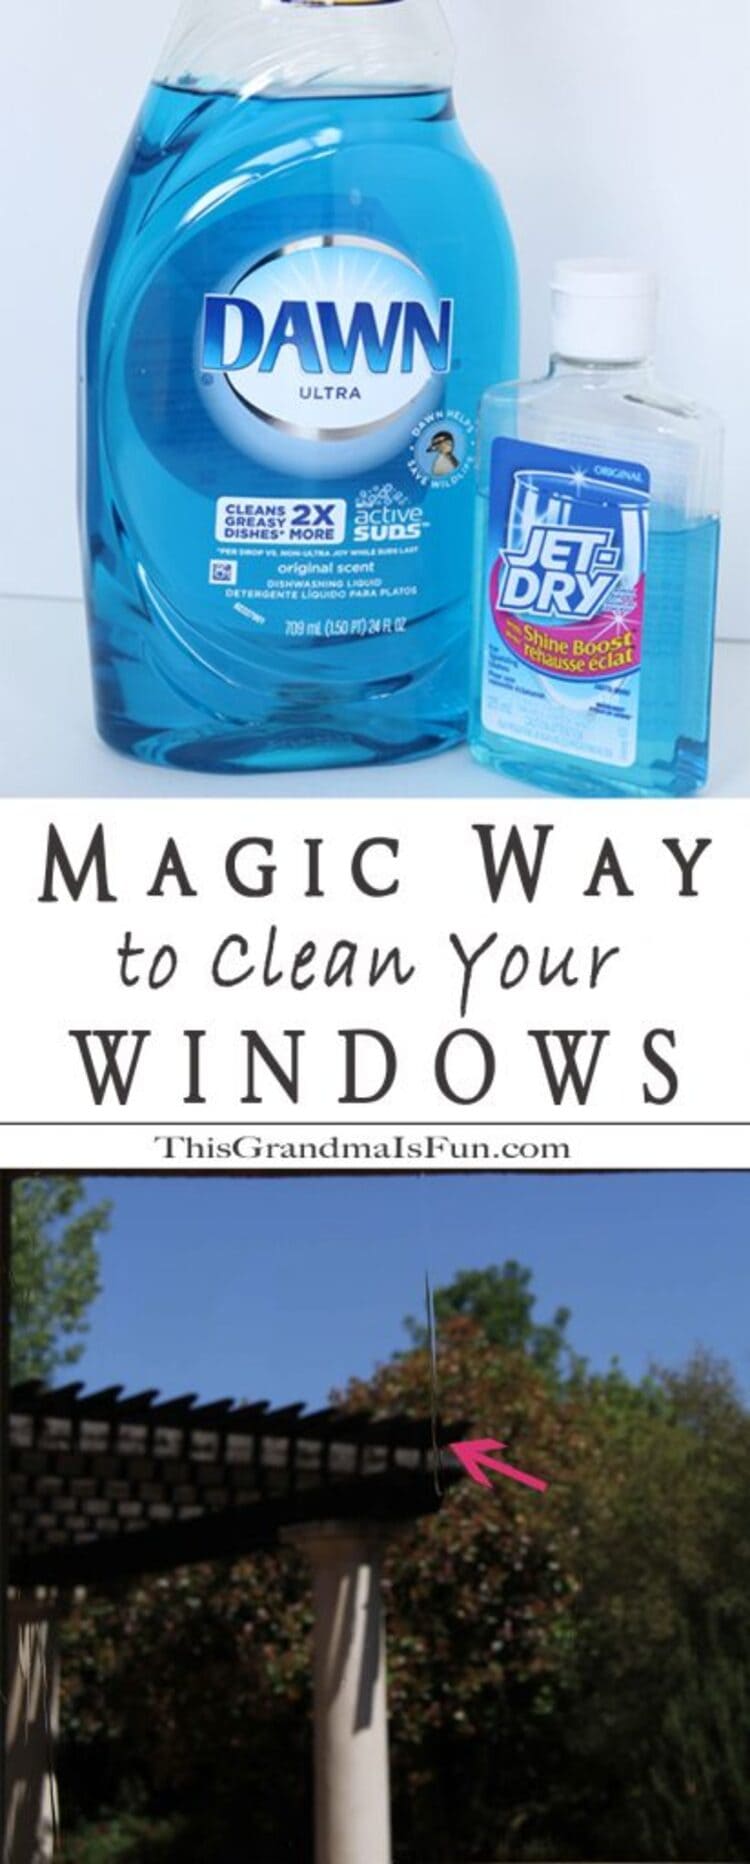 https://www.thisgrandmaisfun.com/wp-content/uploads/2021/08/01-Magic-Way-to-Clean-Your-Window-Photo-of-Jet-Dry-Detergent-and-Window-with-Drop-Of-Water-While-Drying.jpg